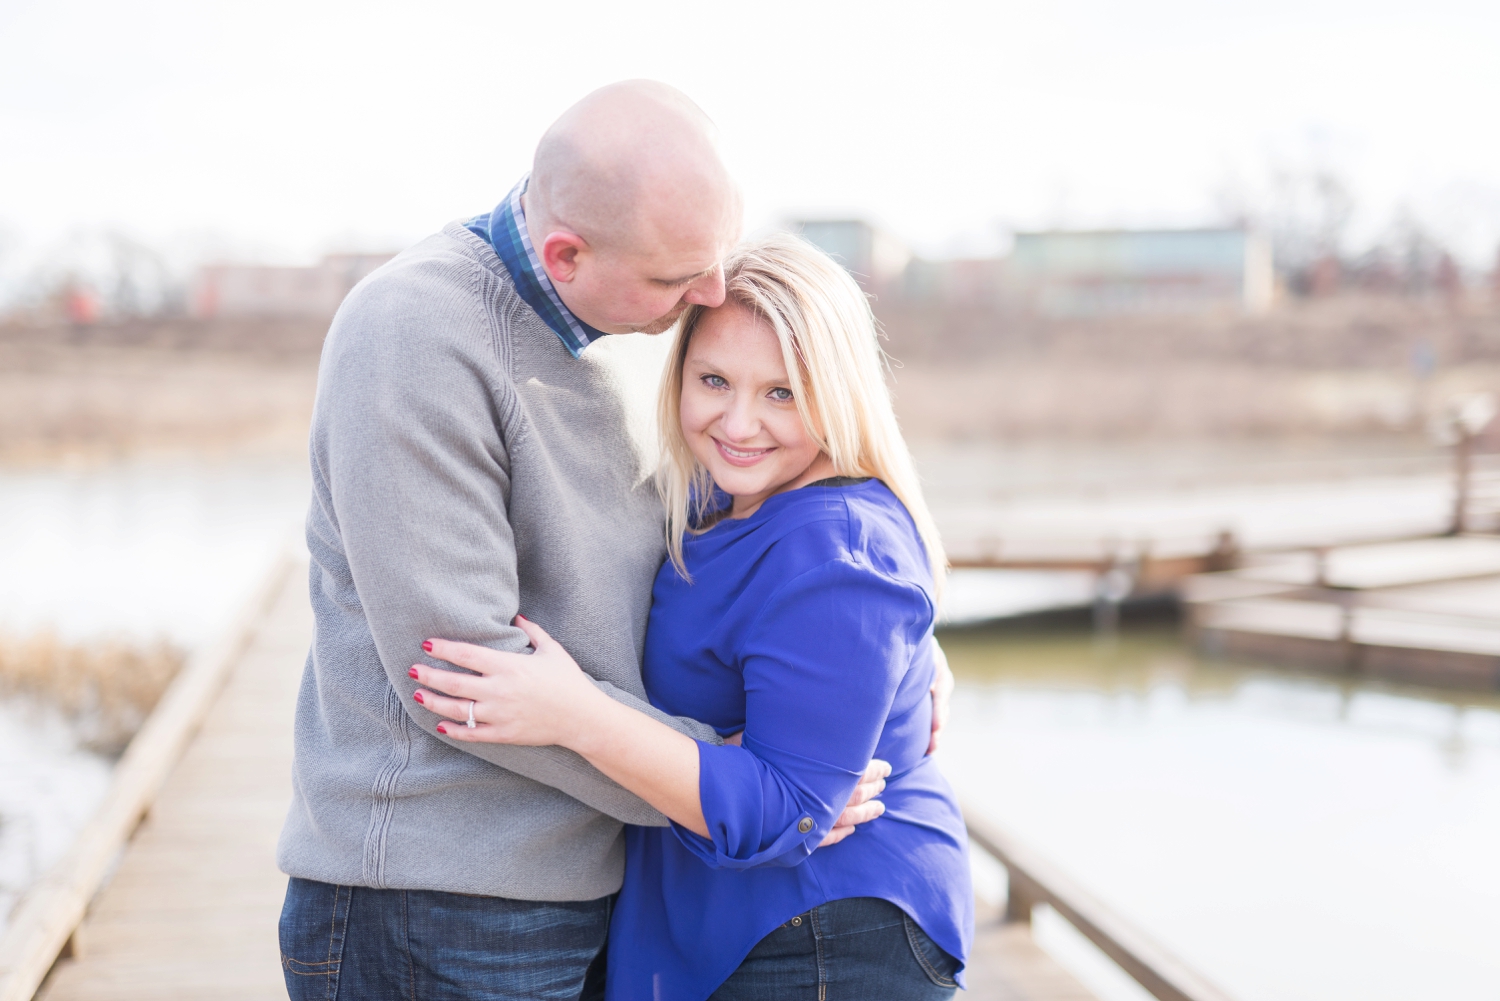 winter-engaged-couple-at-their-photo-session-at-the-scioto-audubon-park-near-grange-audubon-center-with-walkways-and-grass_0314